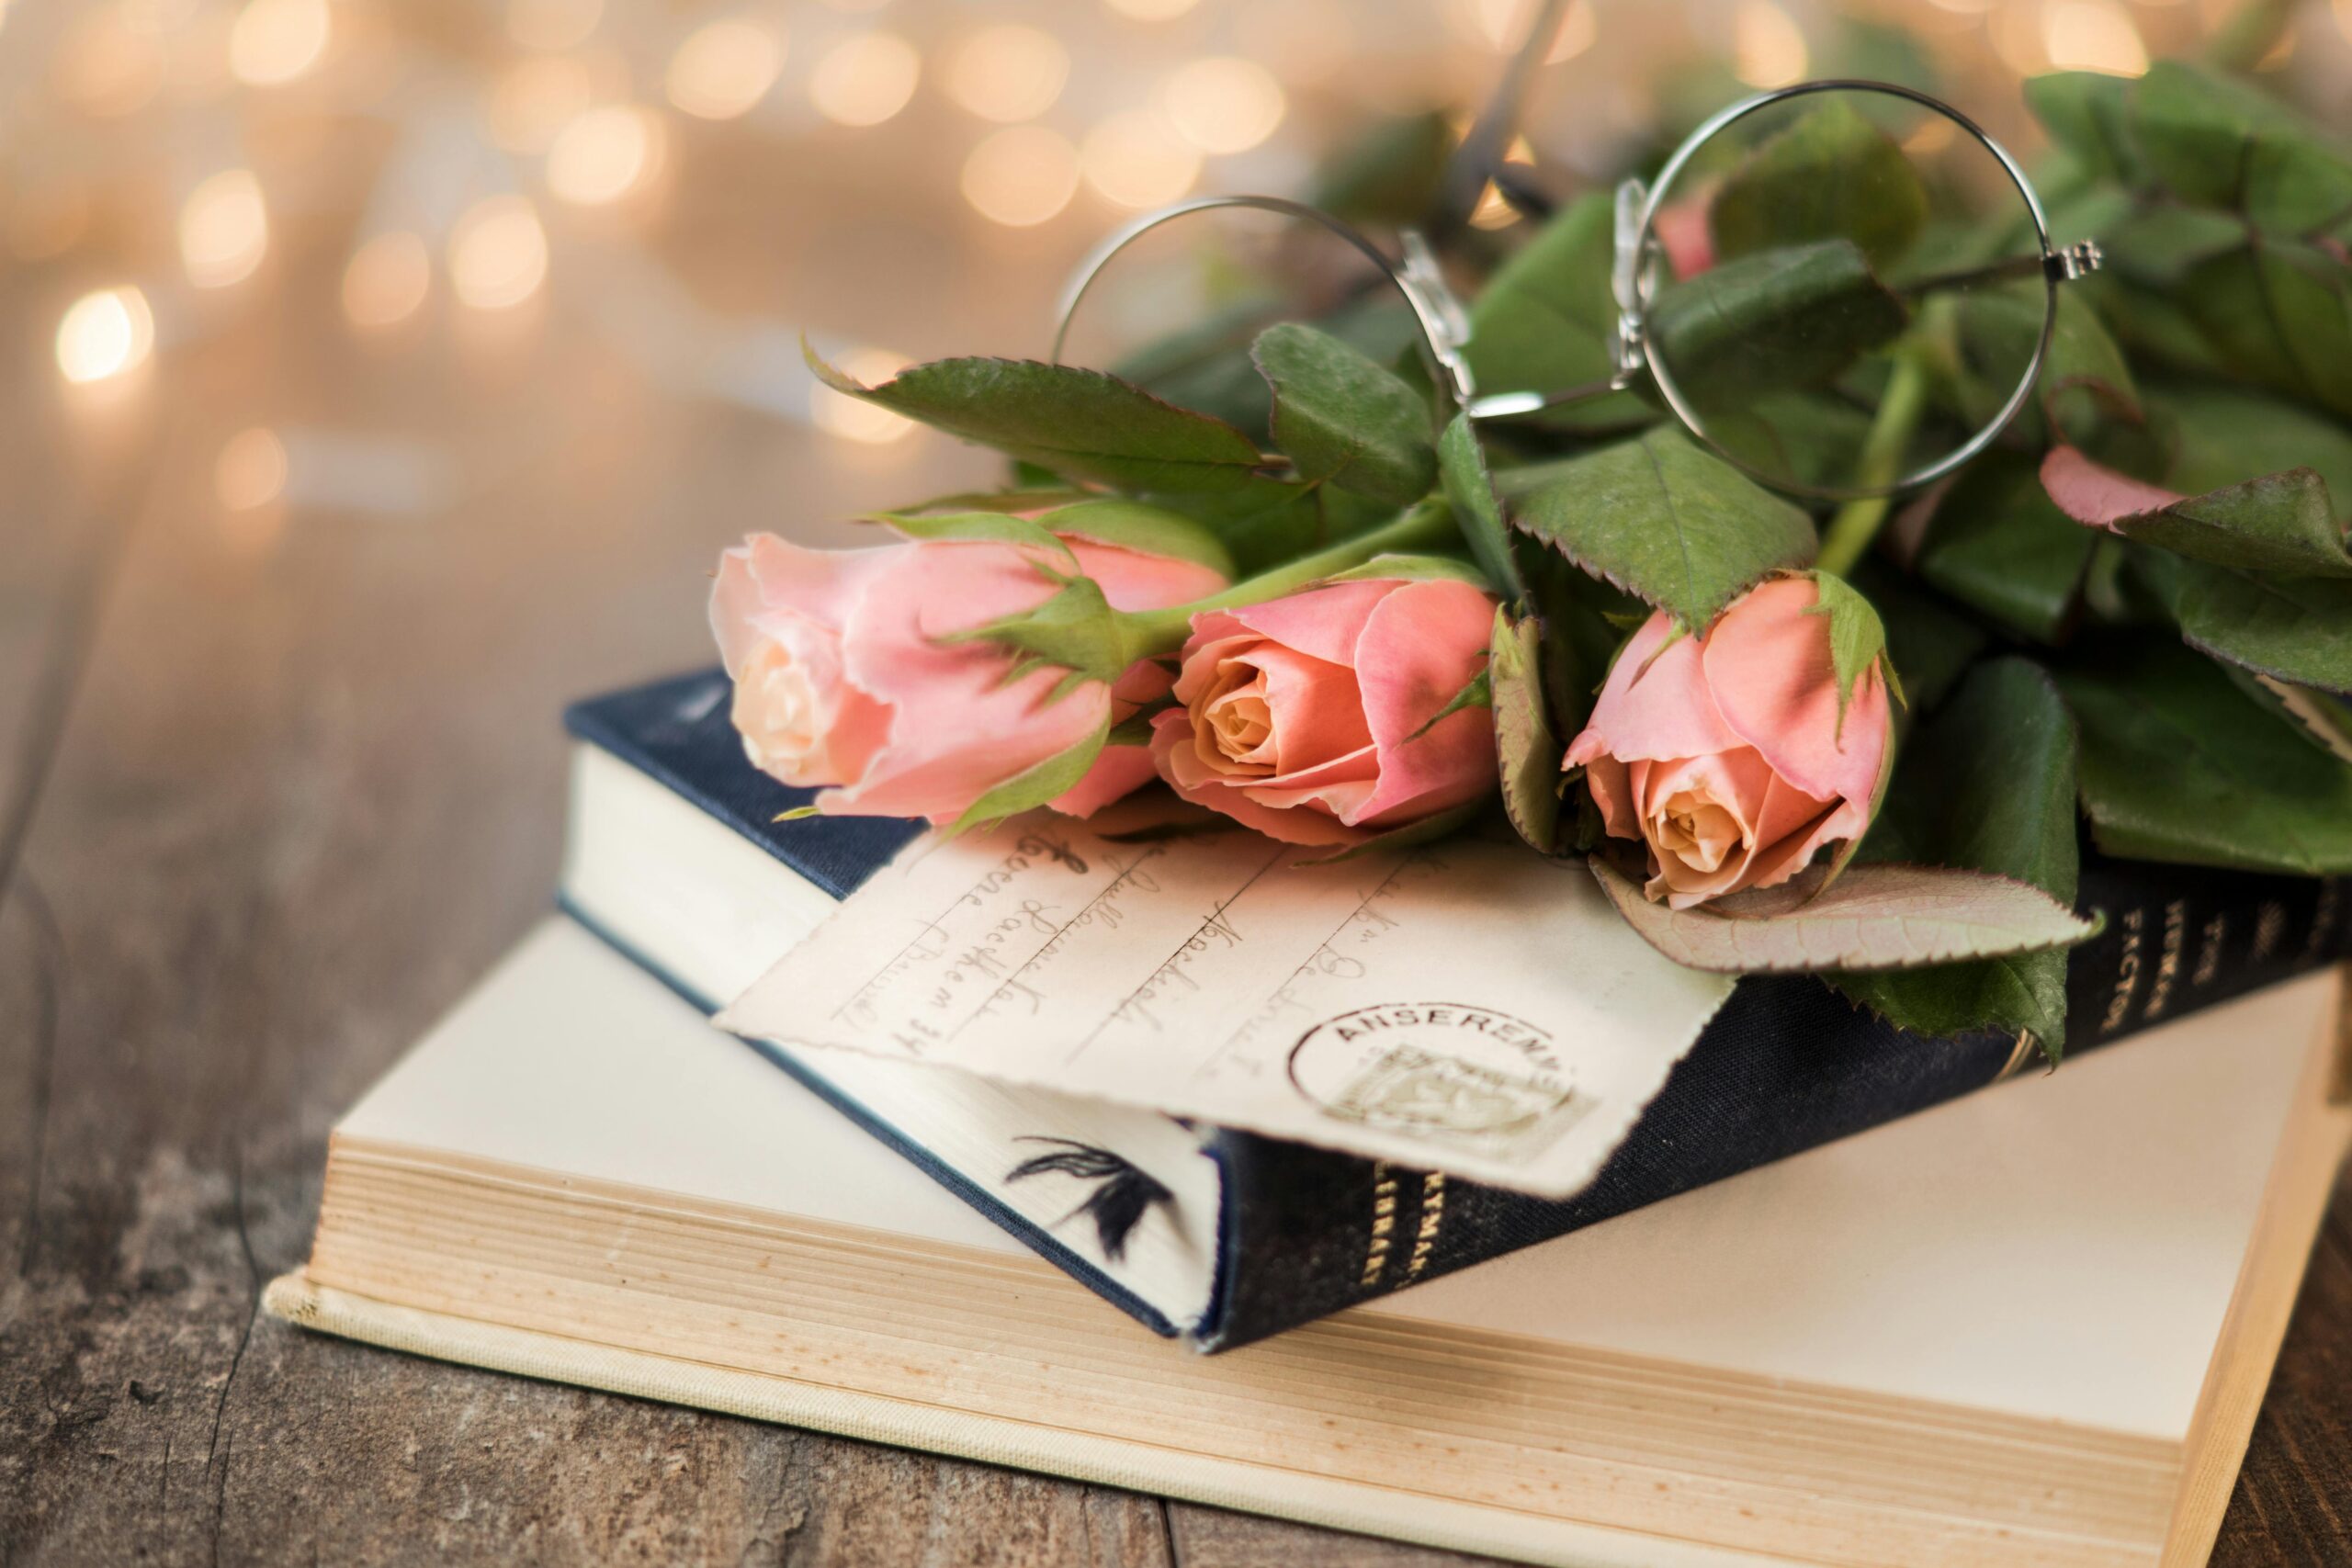 A card and pink roses on top of two books.